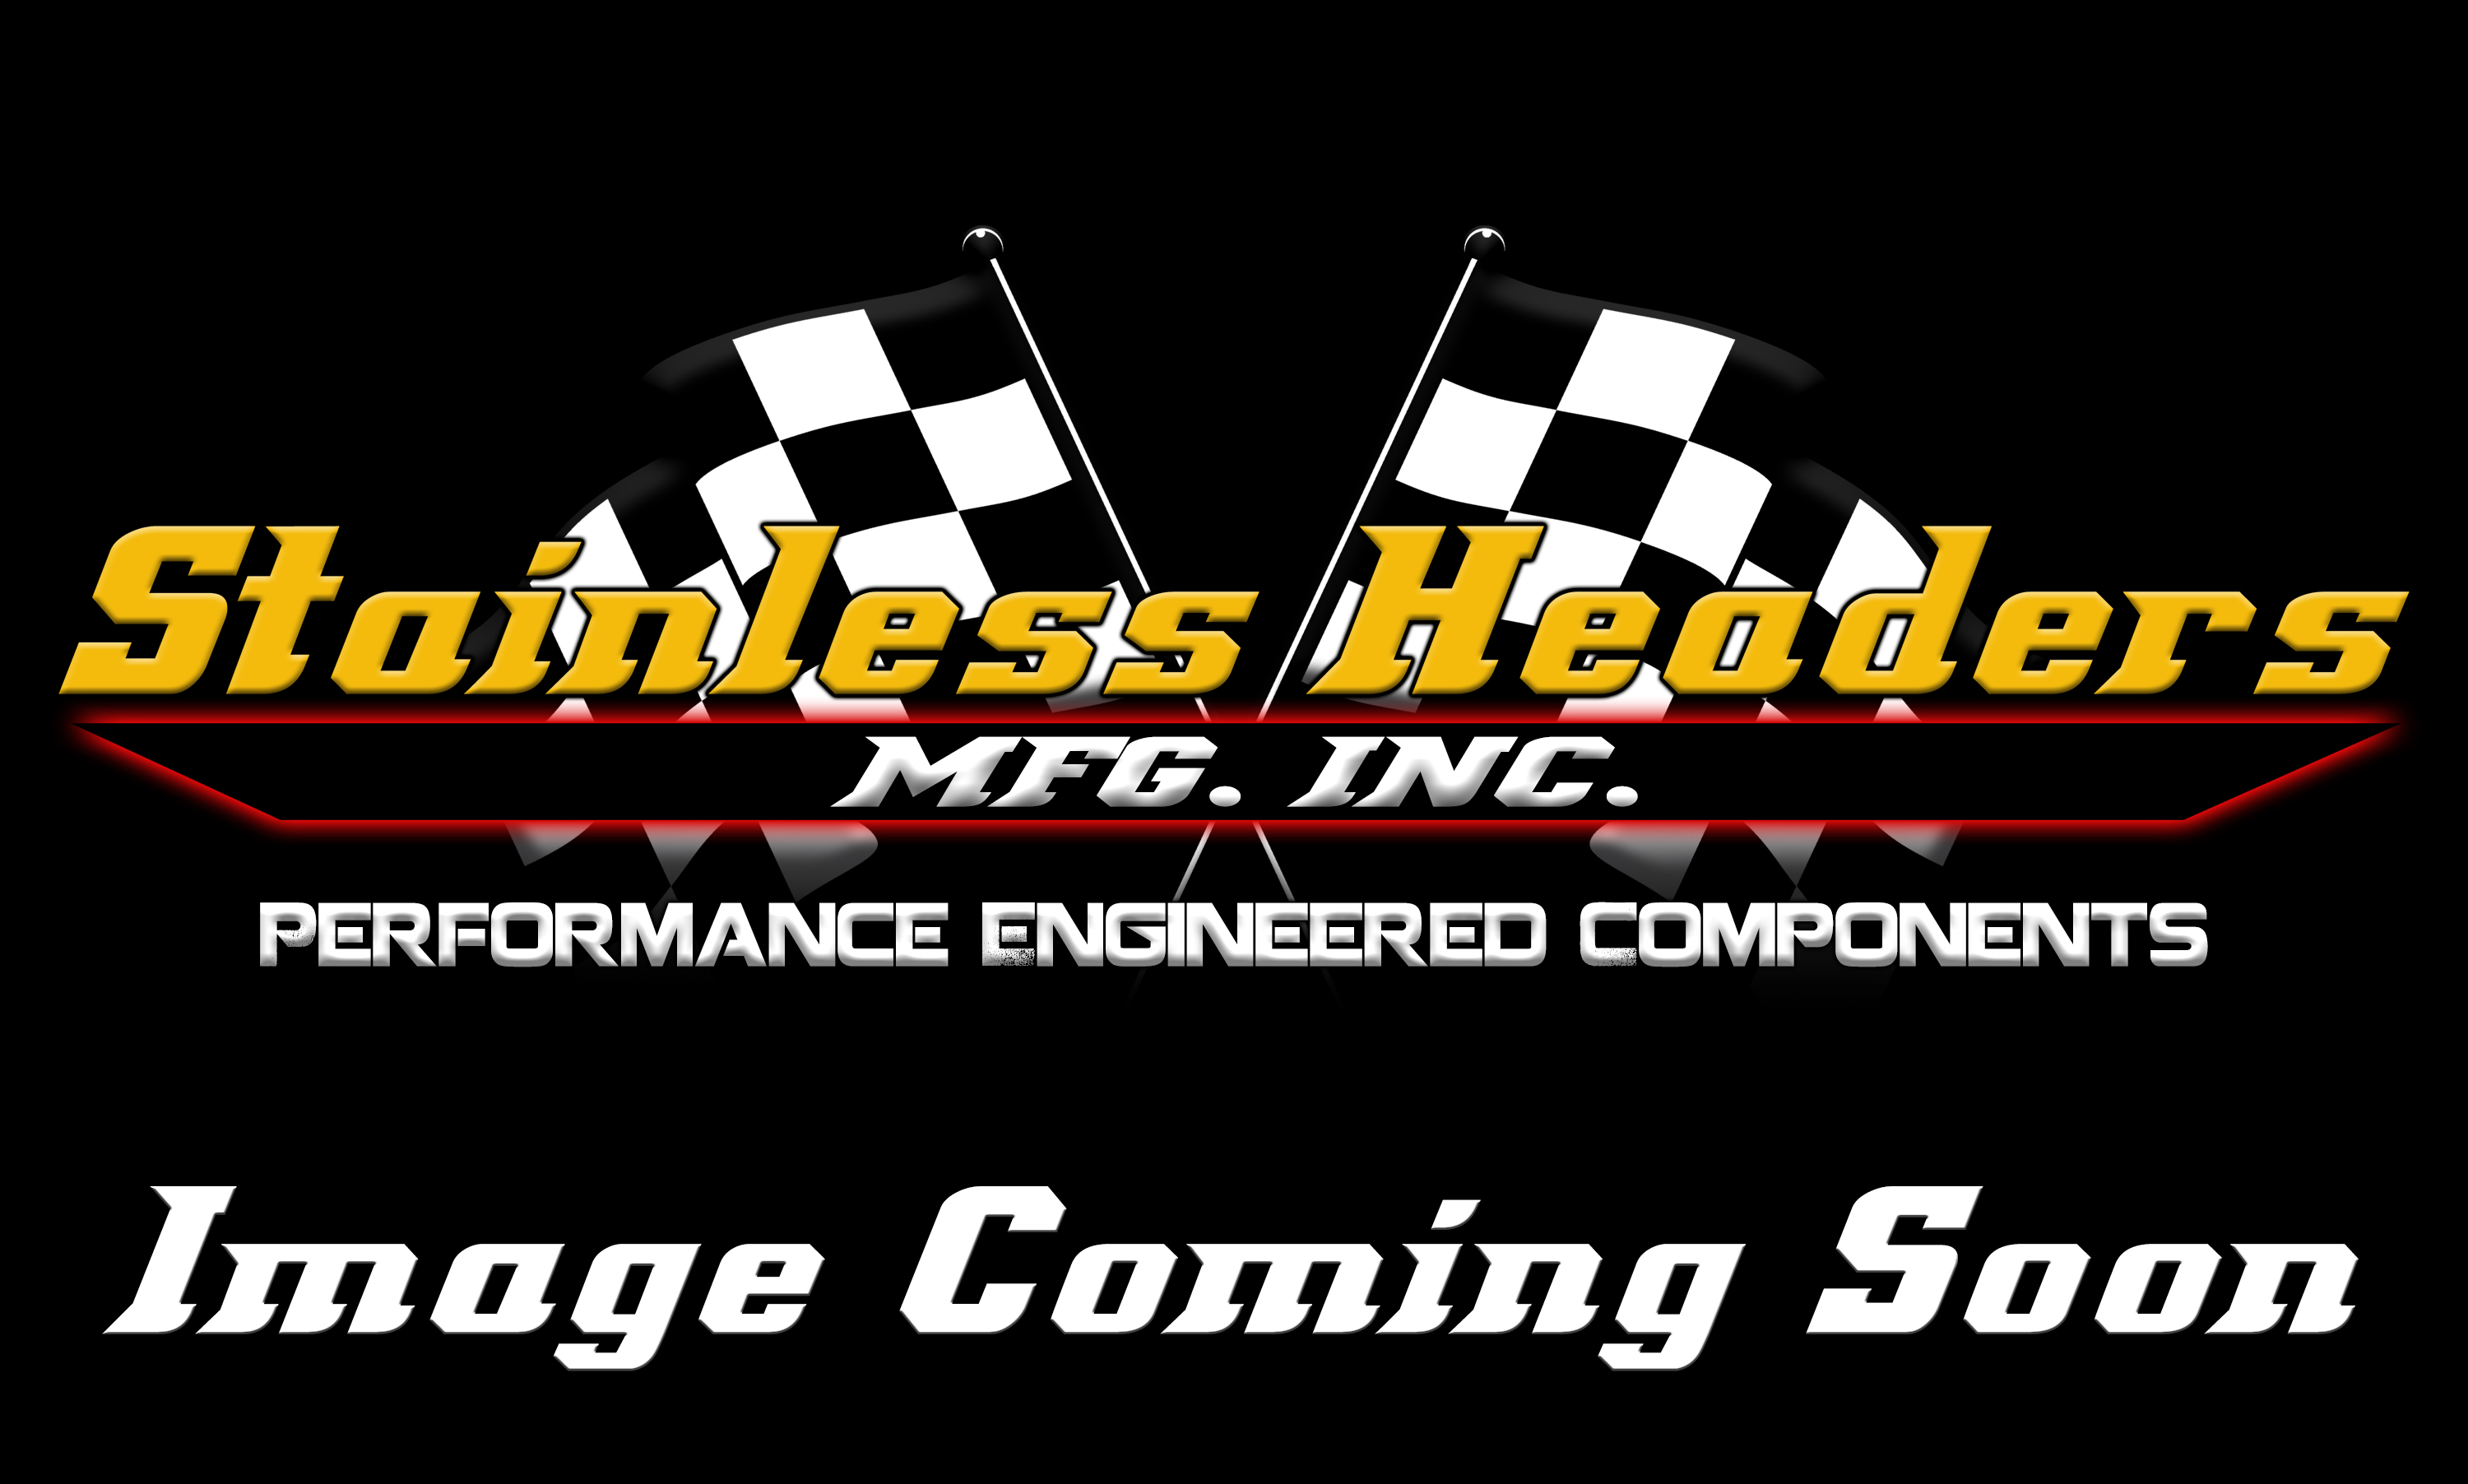 Stainless Headers - 1 3/4" Primary 8 into 1 Performance Merge Collector-16ga 321ss - Image 2